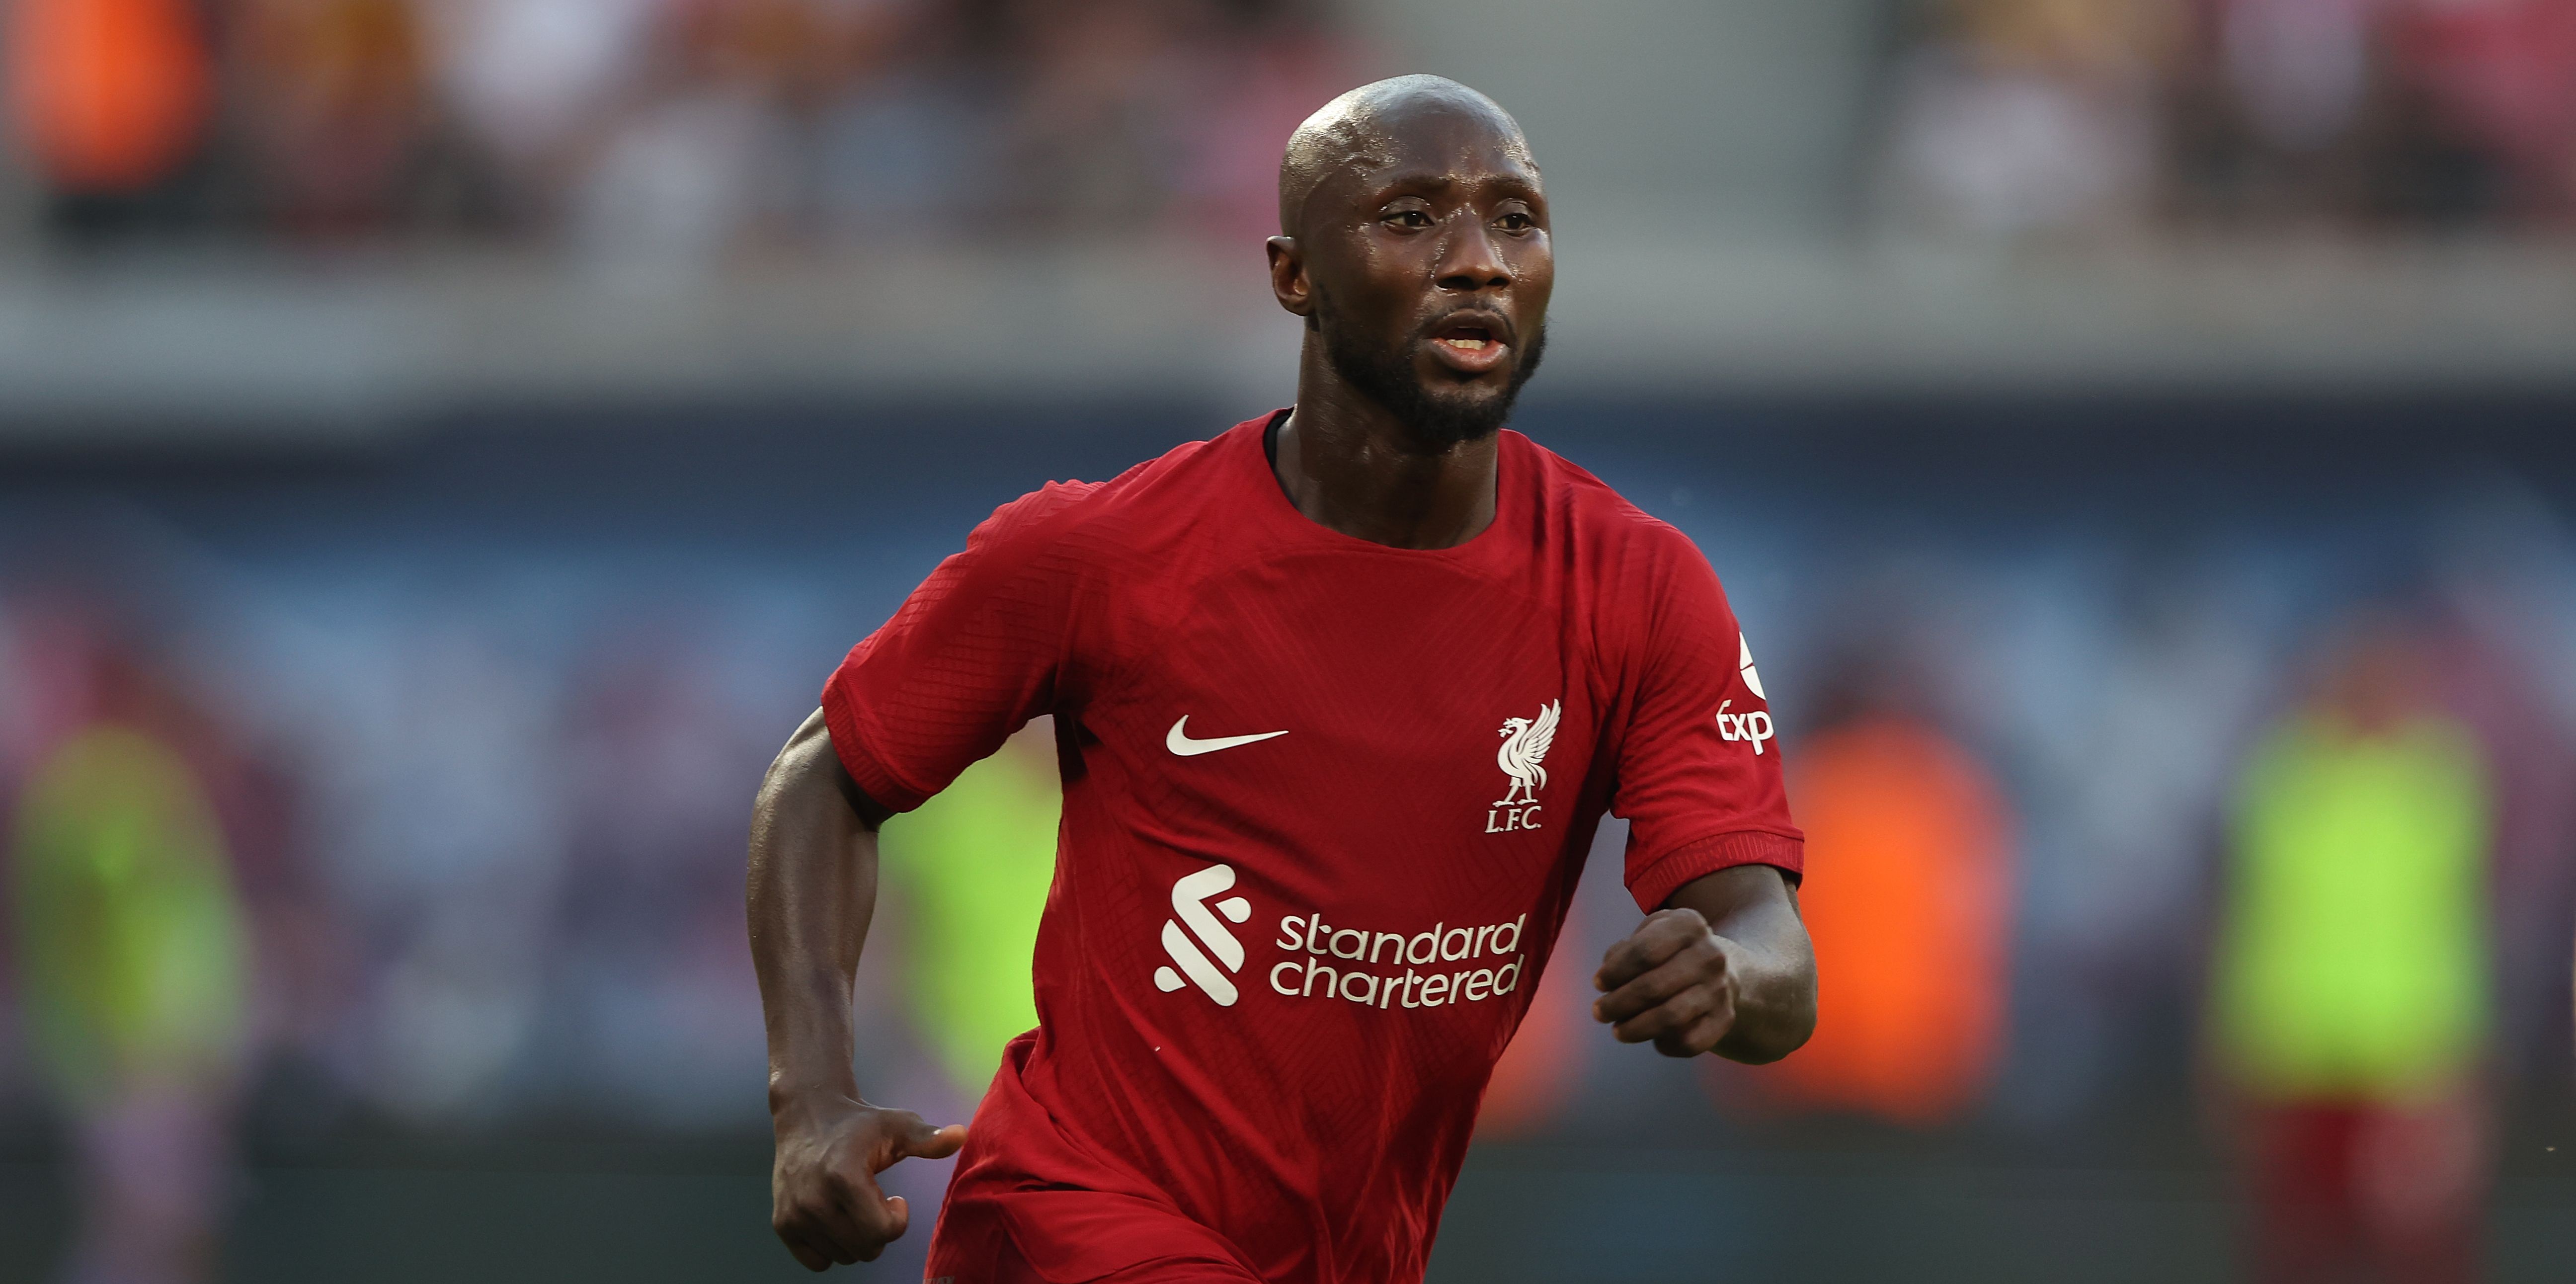 ‘He could probably run a whole marathon’ – Klopp explains when Naby Keita could be back in action